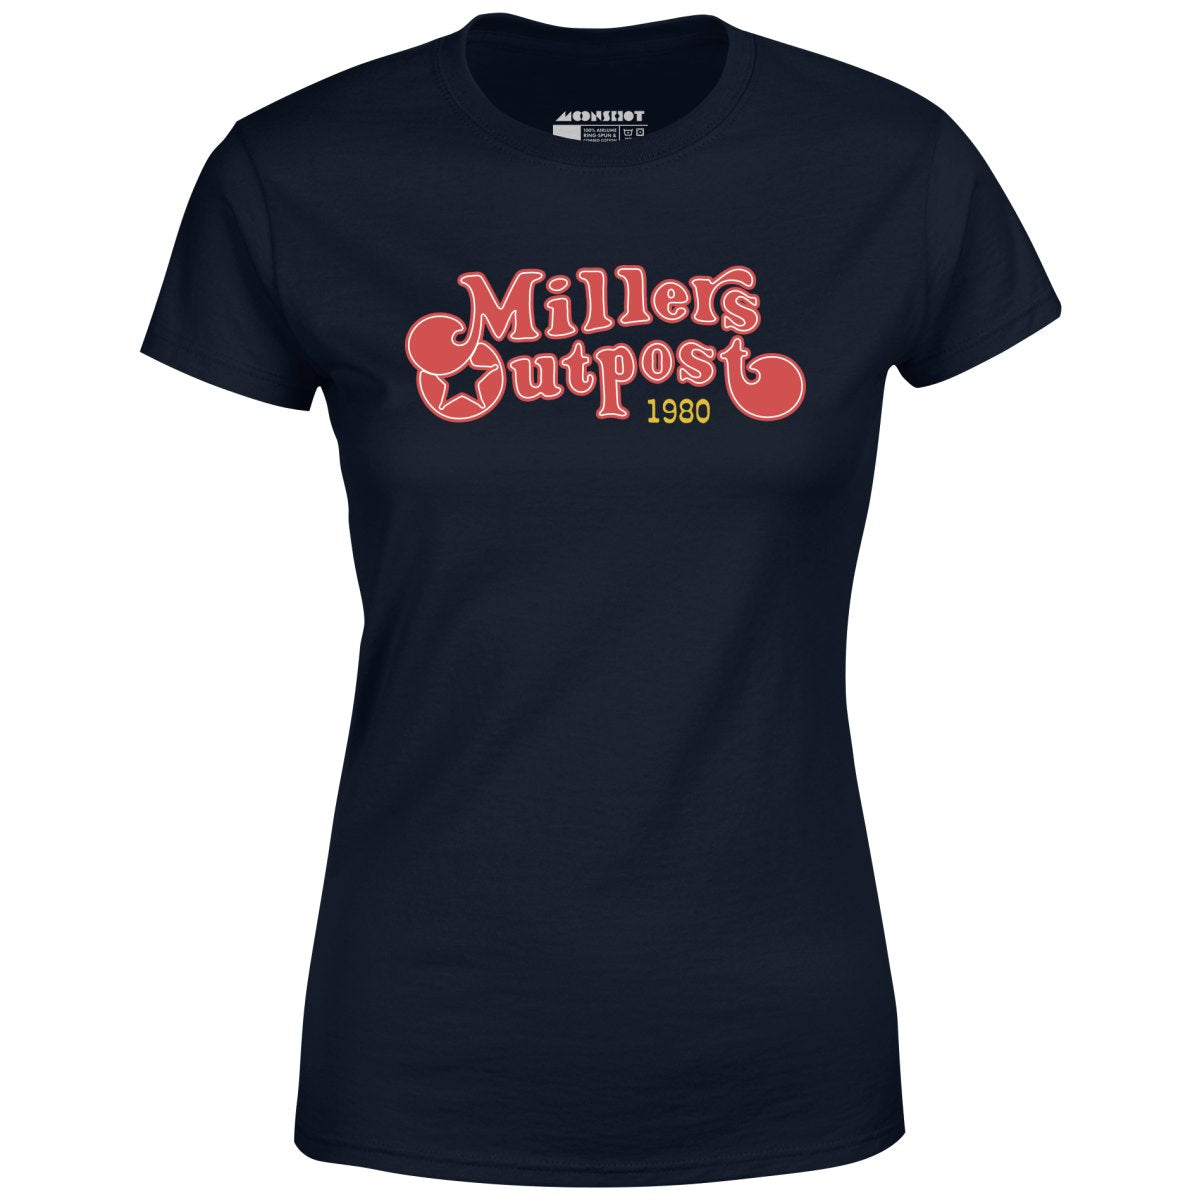 MILLER'S OUTPOST T-SHIRT - Defunct Clothing Company - Grey Version